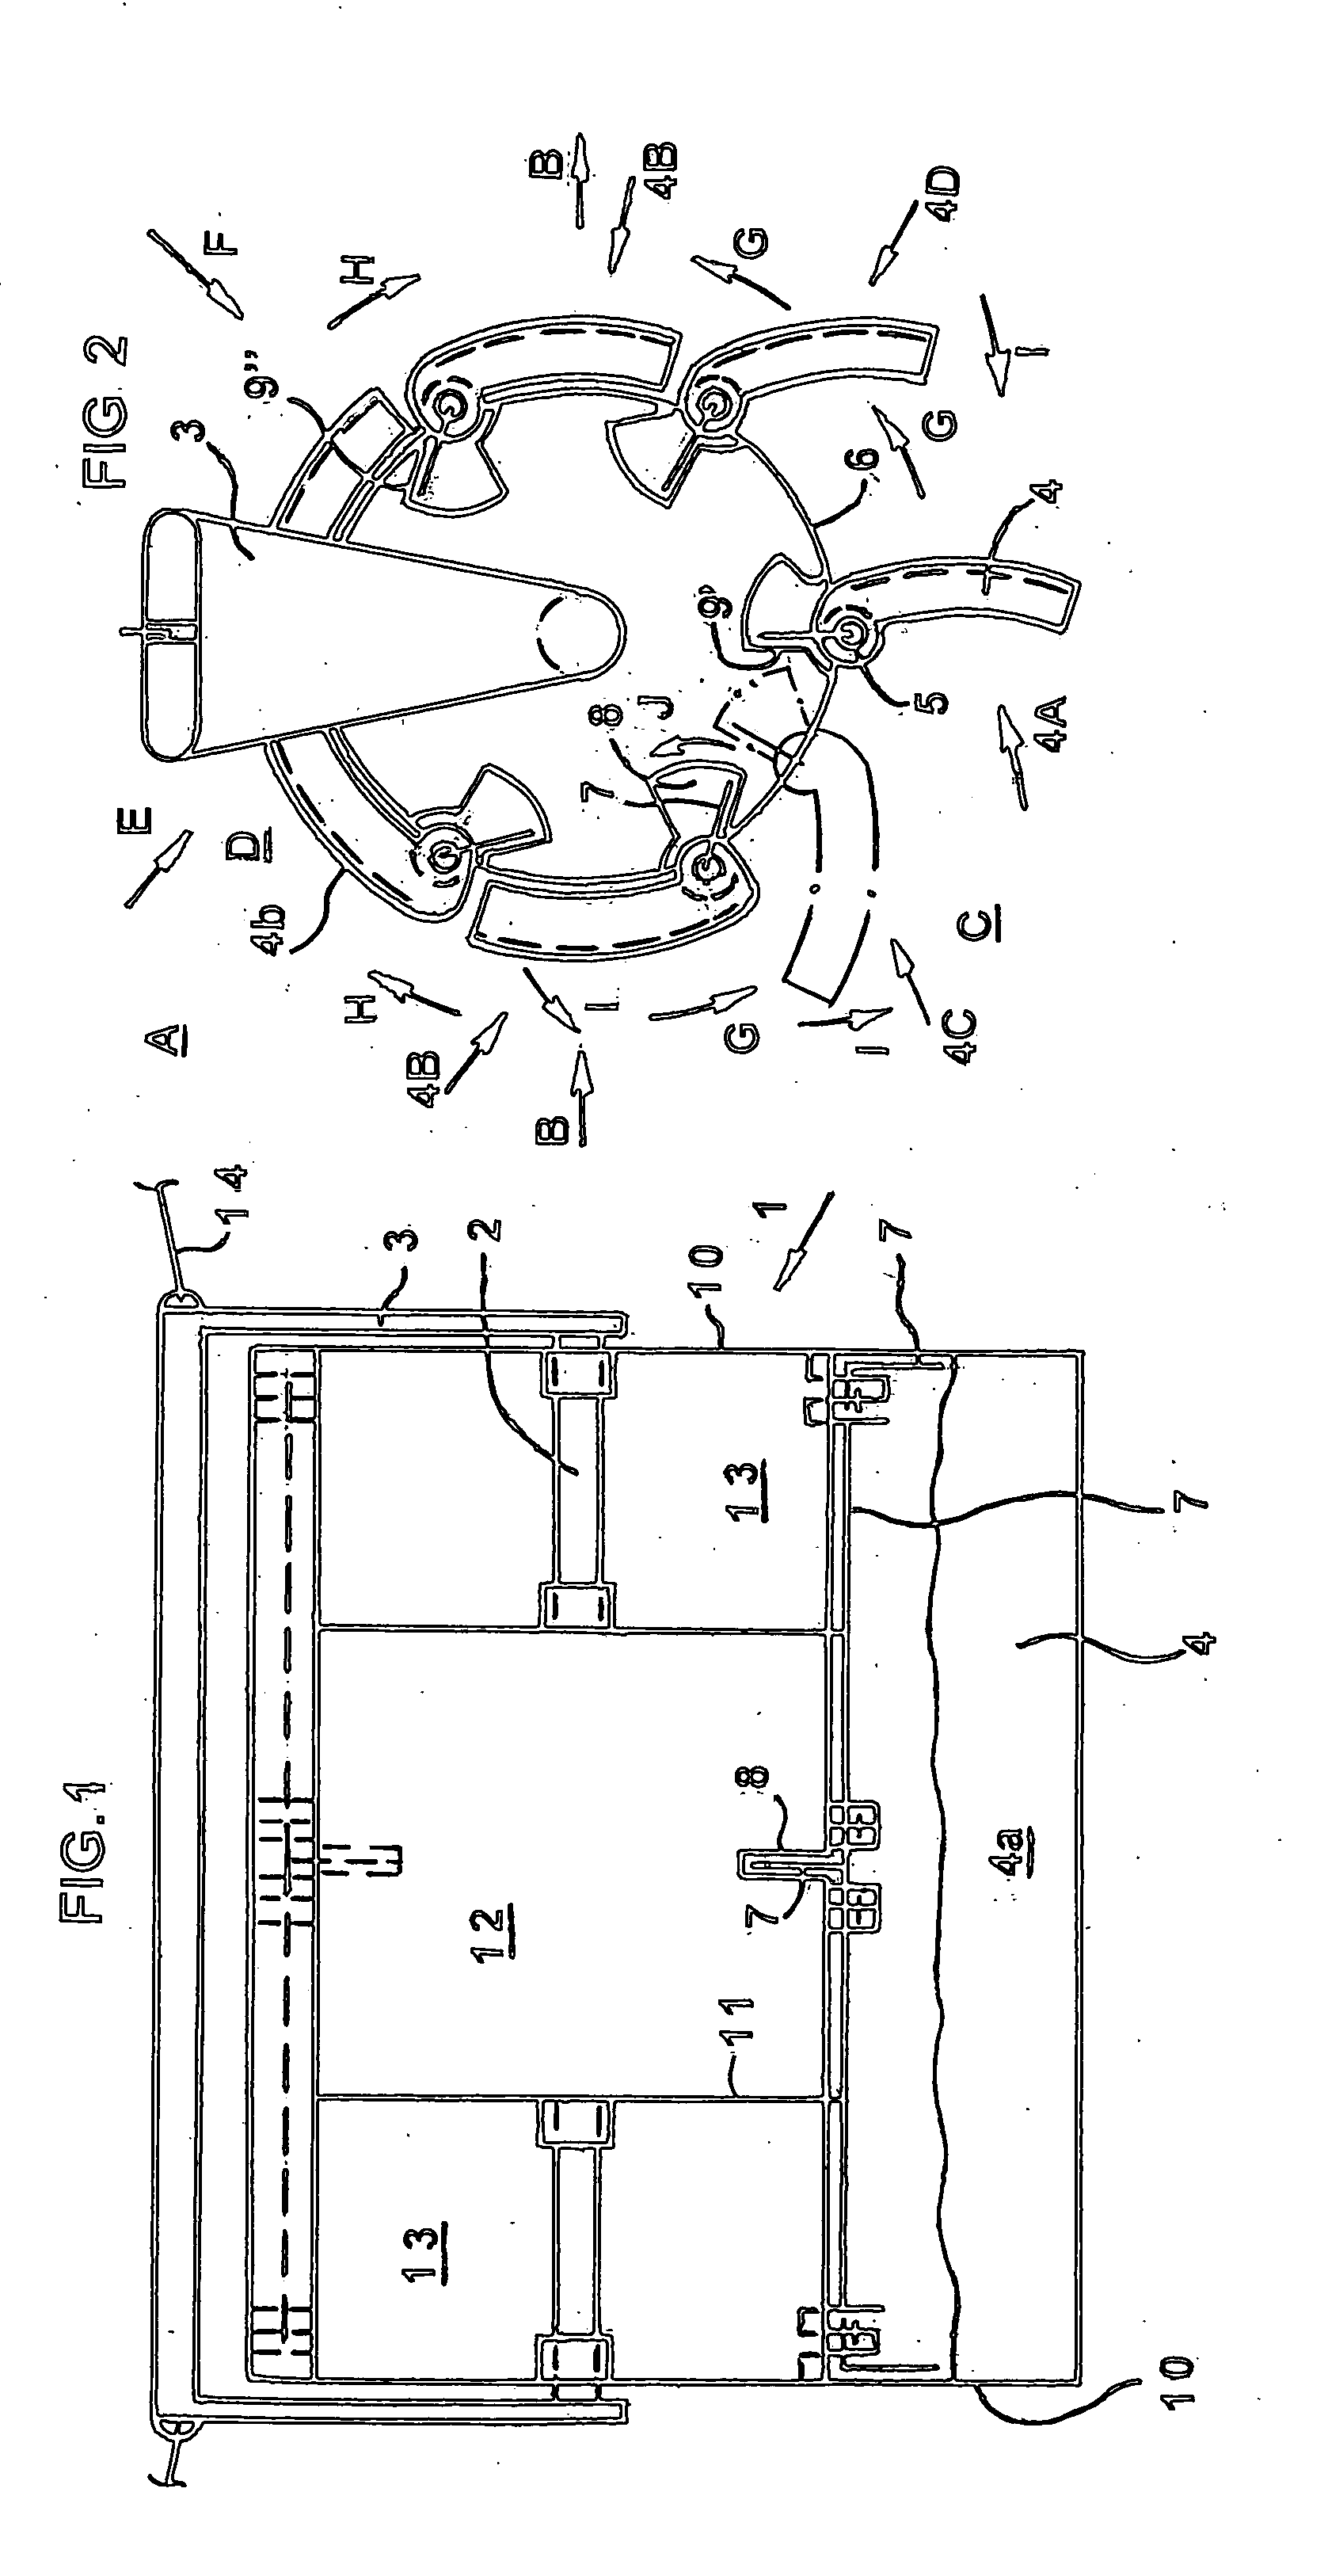 Apparatus for receiving and transferring kinetic energy from water flow